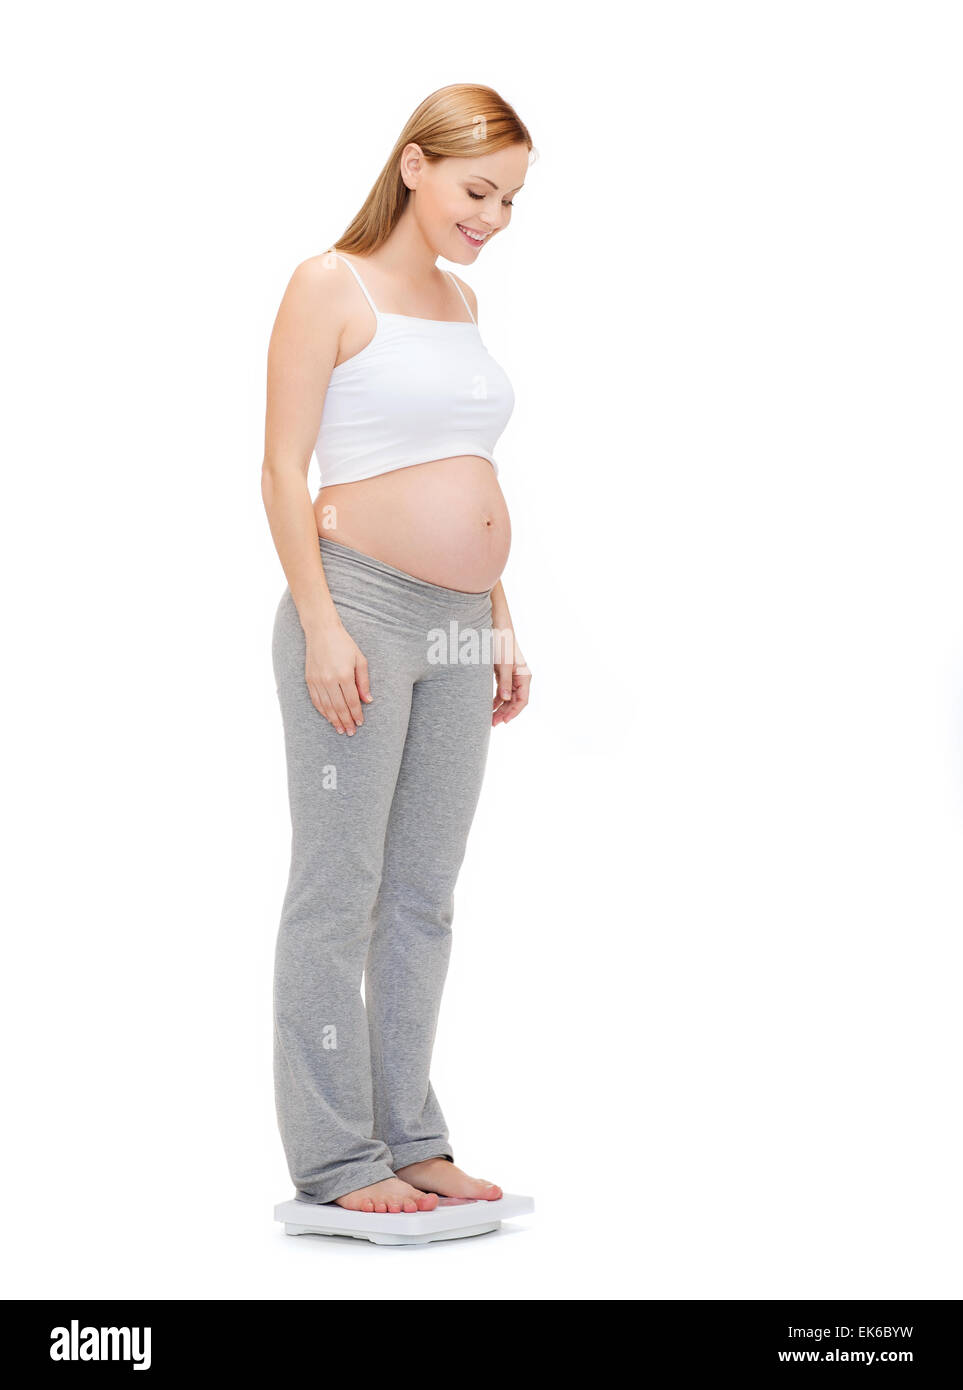 happy pregnant woman weighting herself Stock Photo